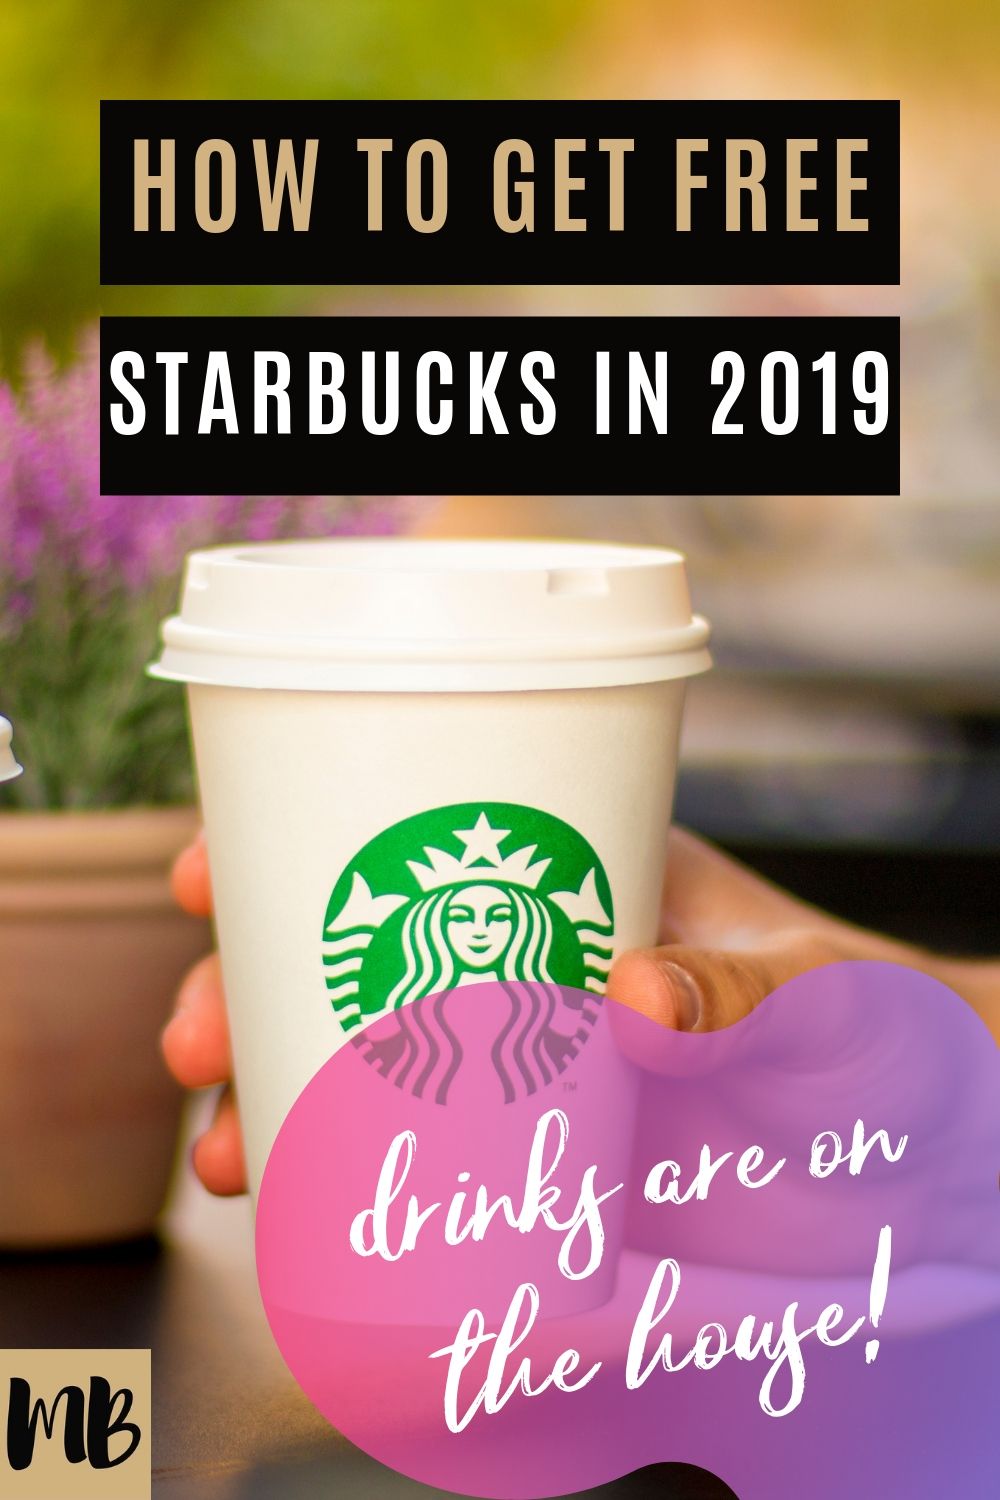 How to get free Starbucks in 2019 and other great drink deals